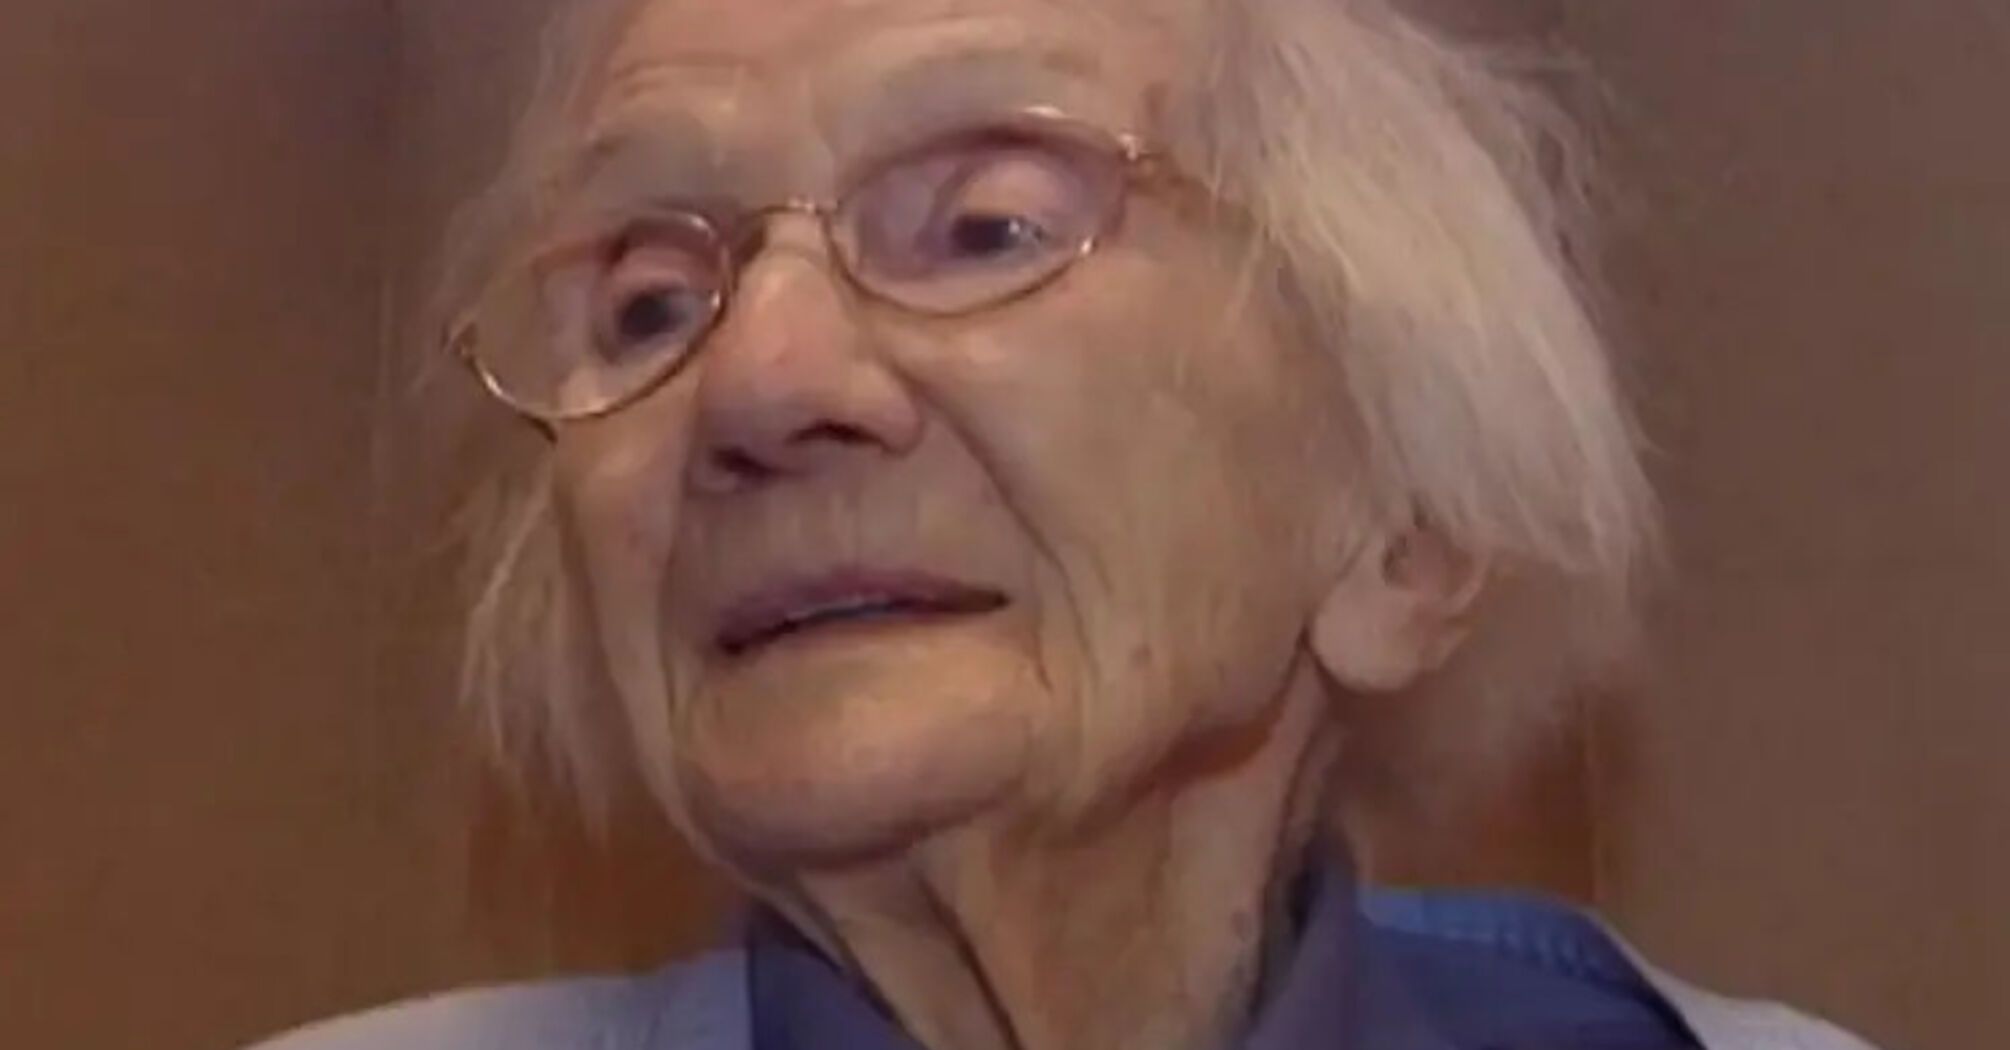 A 109-year-old woman surprised with a secret